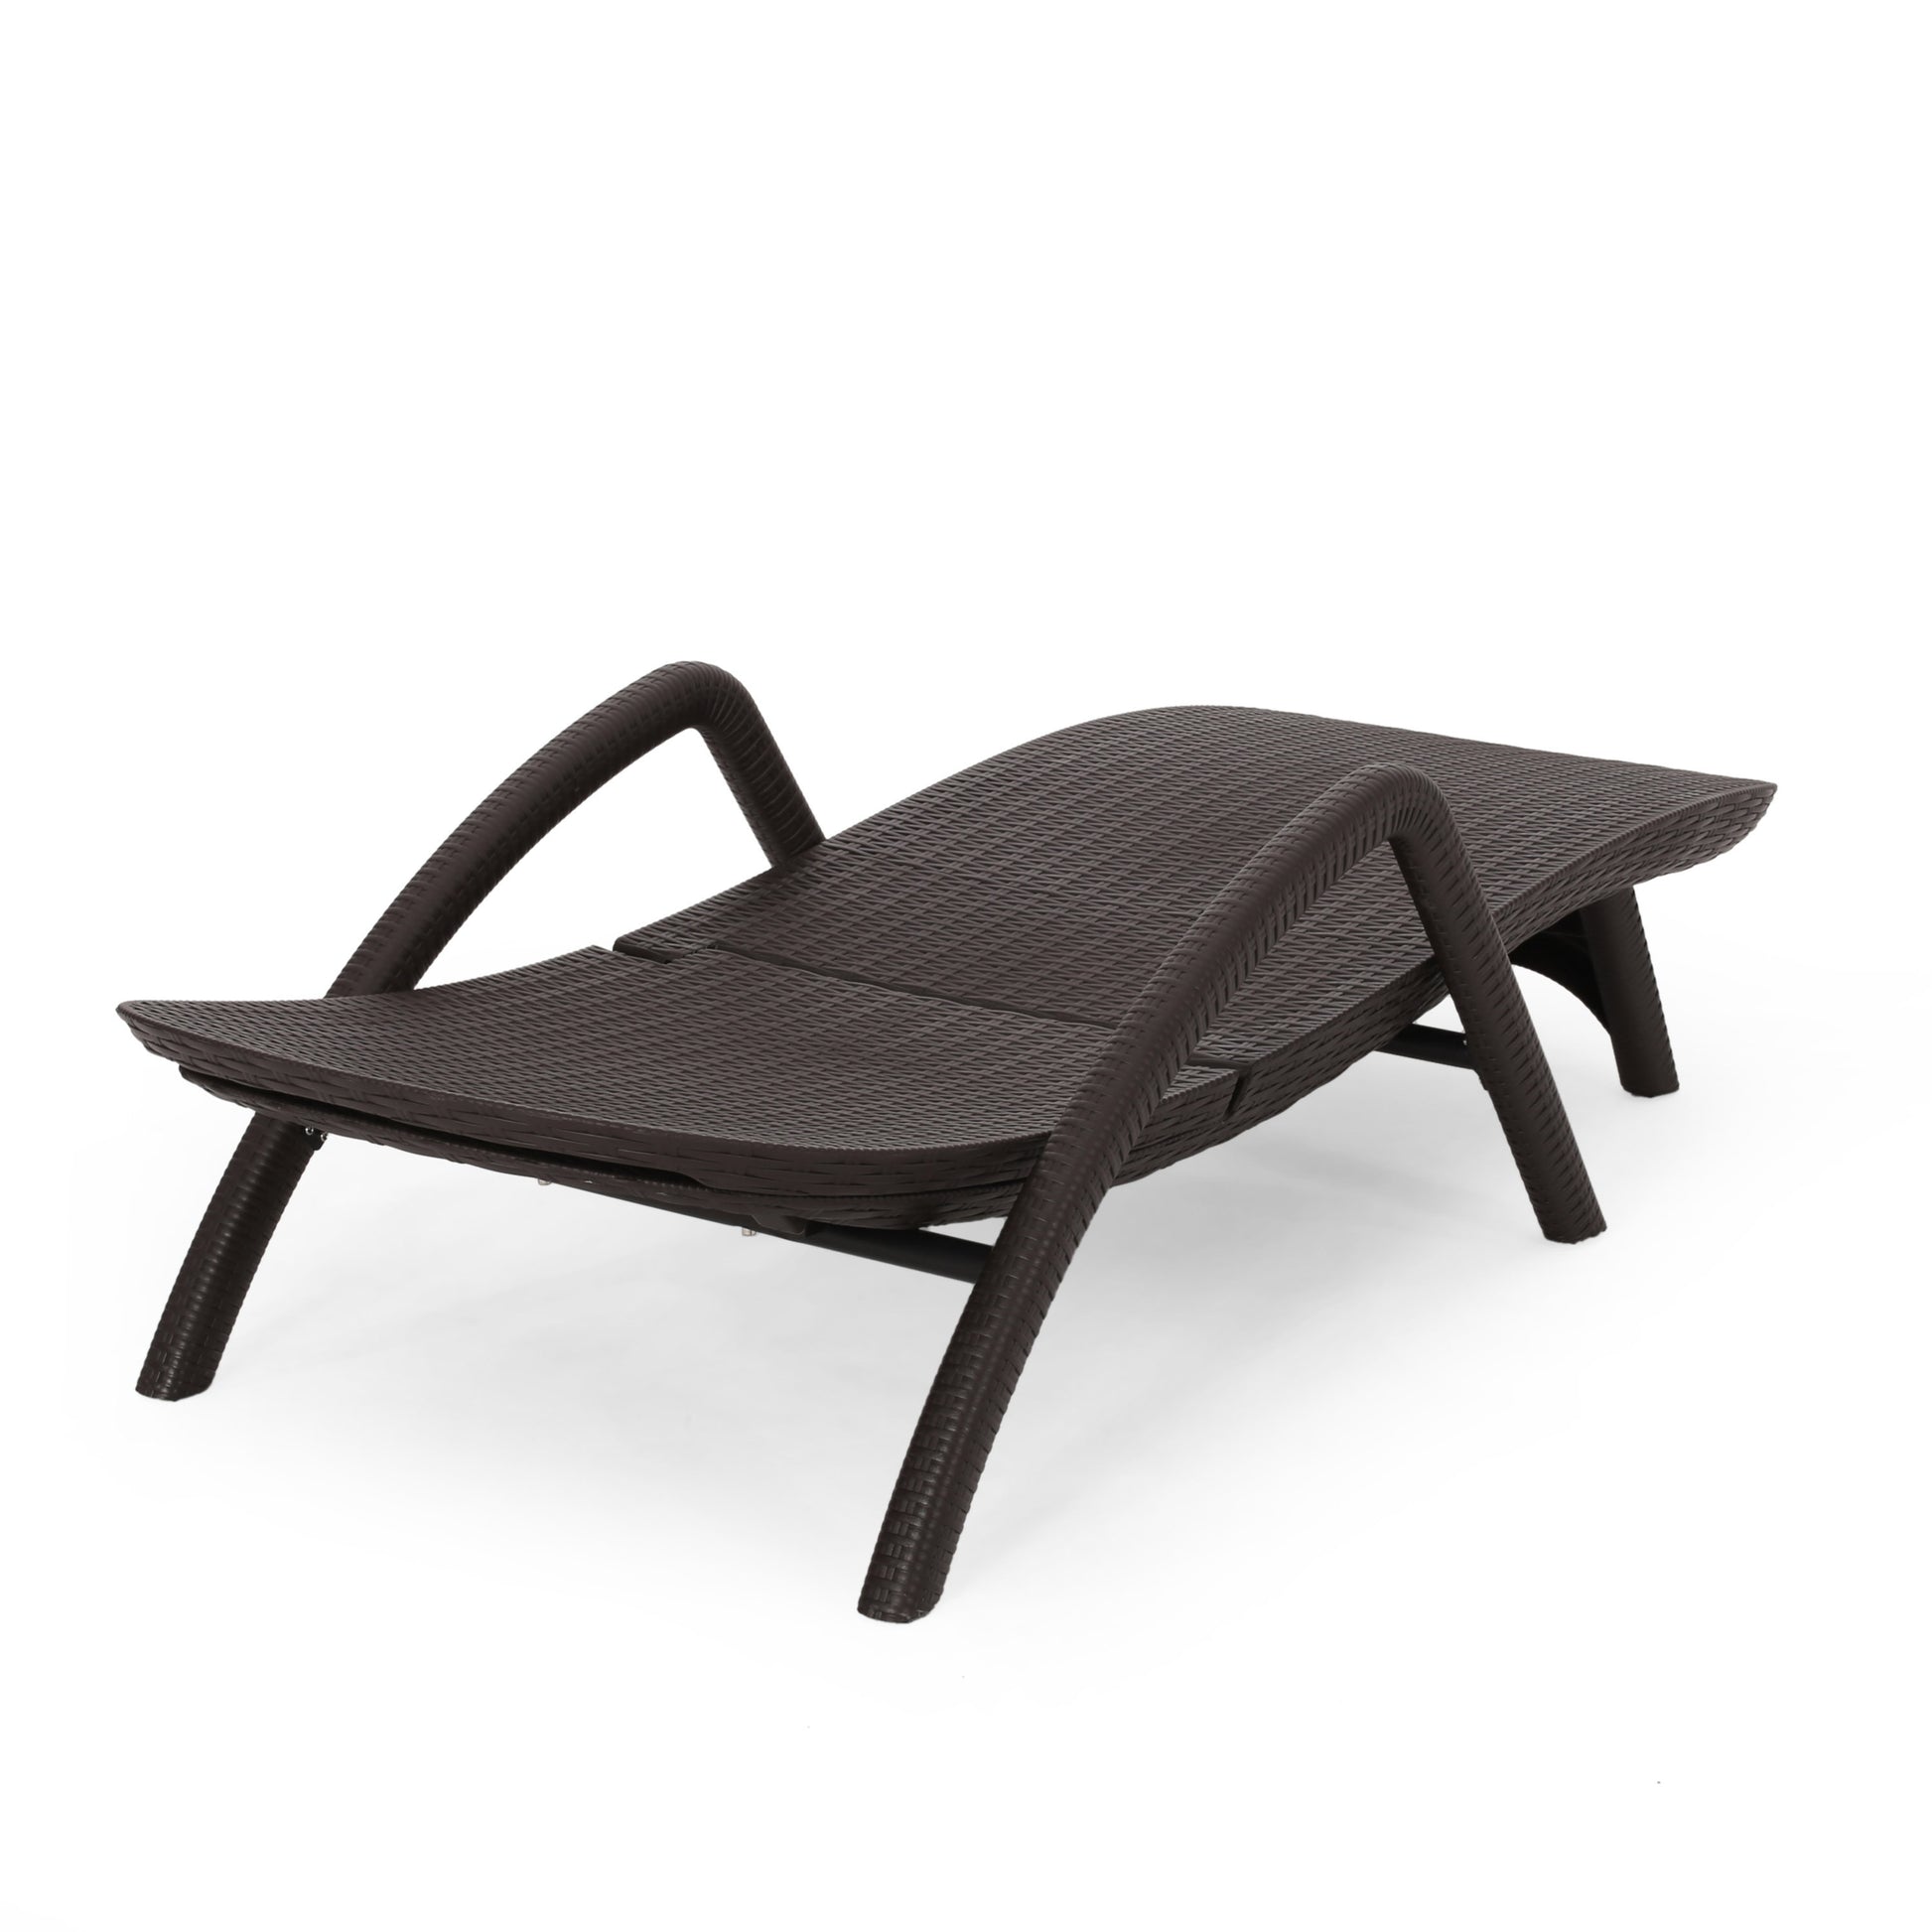 Mikael Chaise Lounge